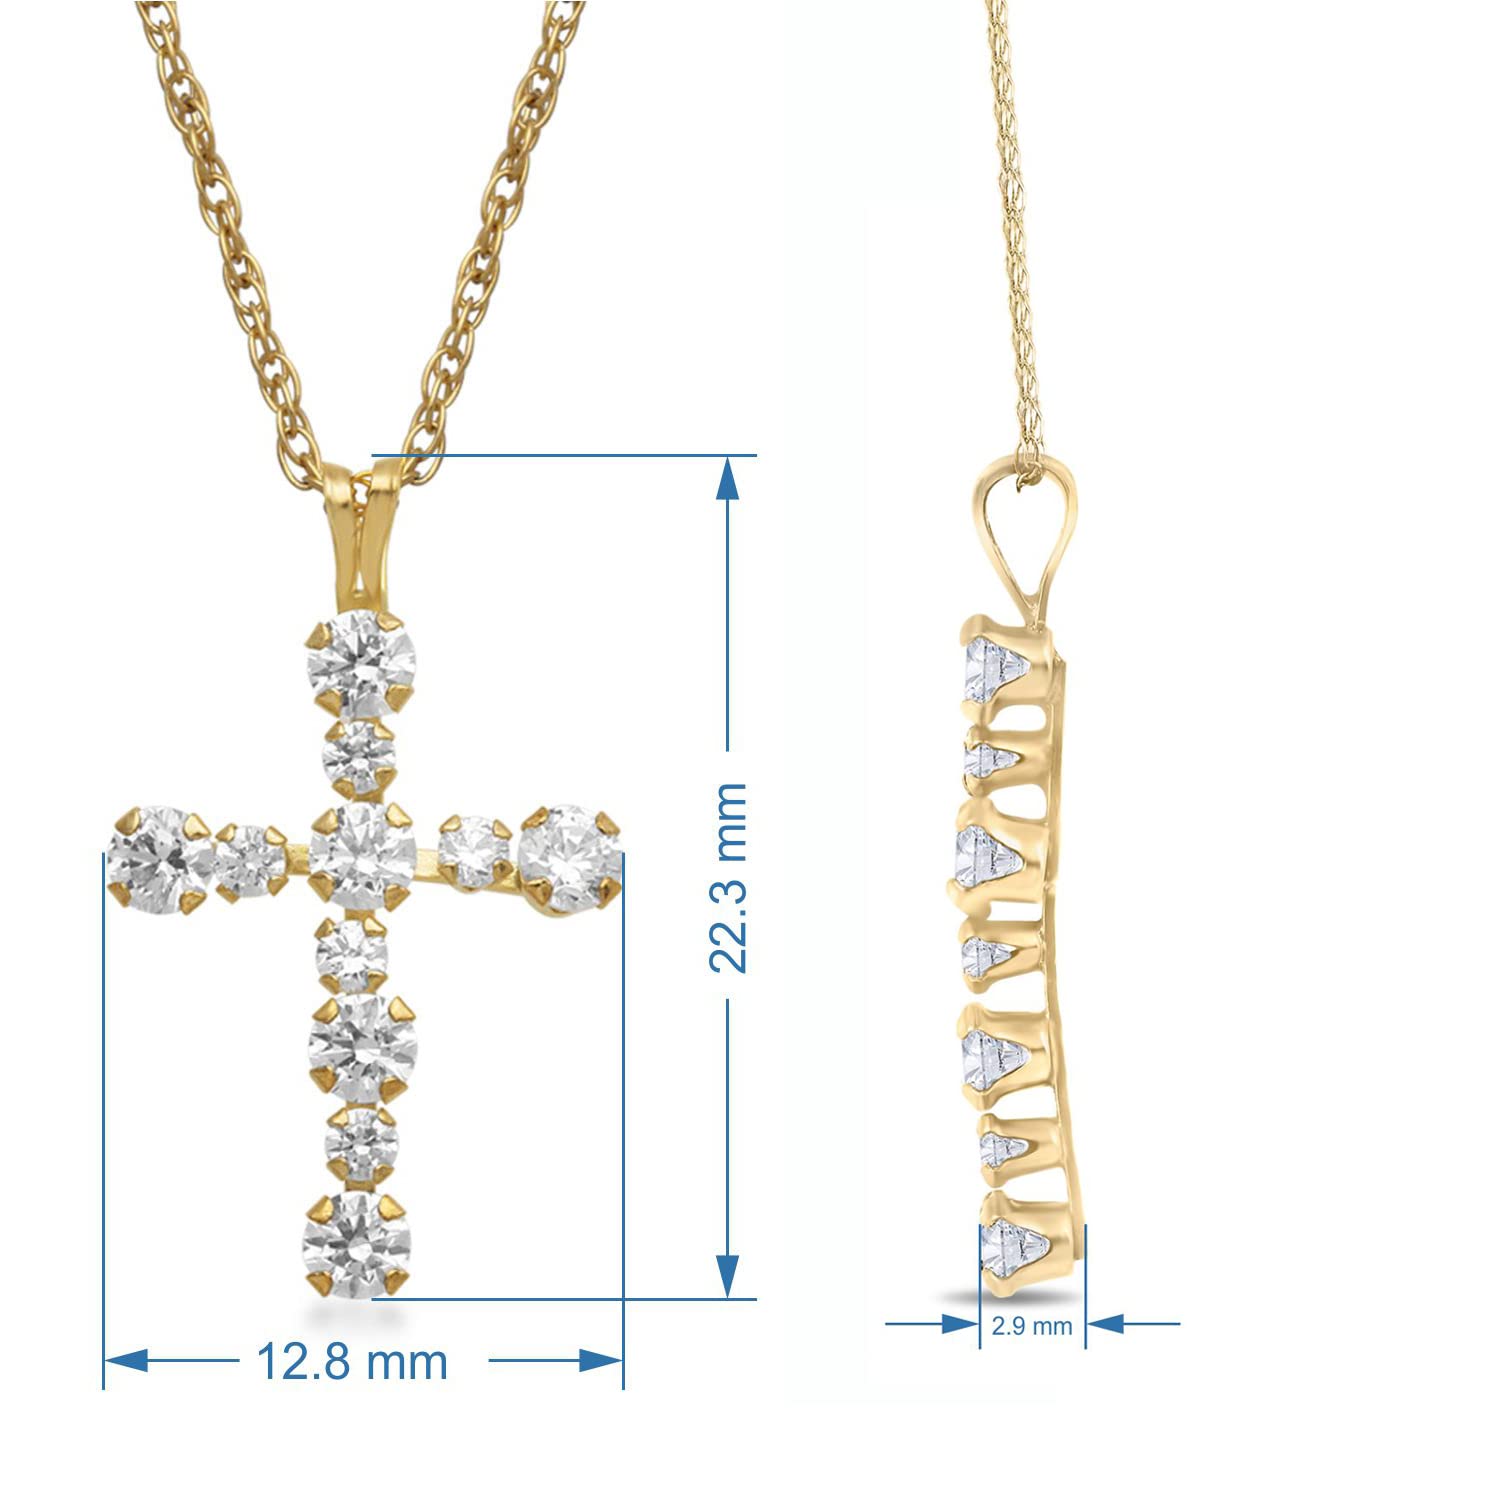 Jewelili 10K Gold 2 MM and 3 MM Round White Cubic Zirconia Cross Pendant Necklace, 18